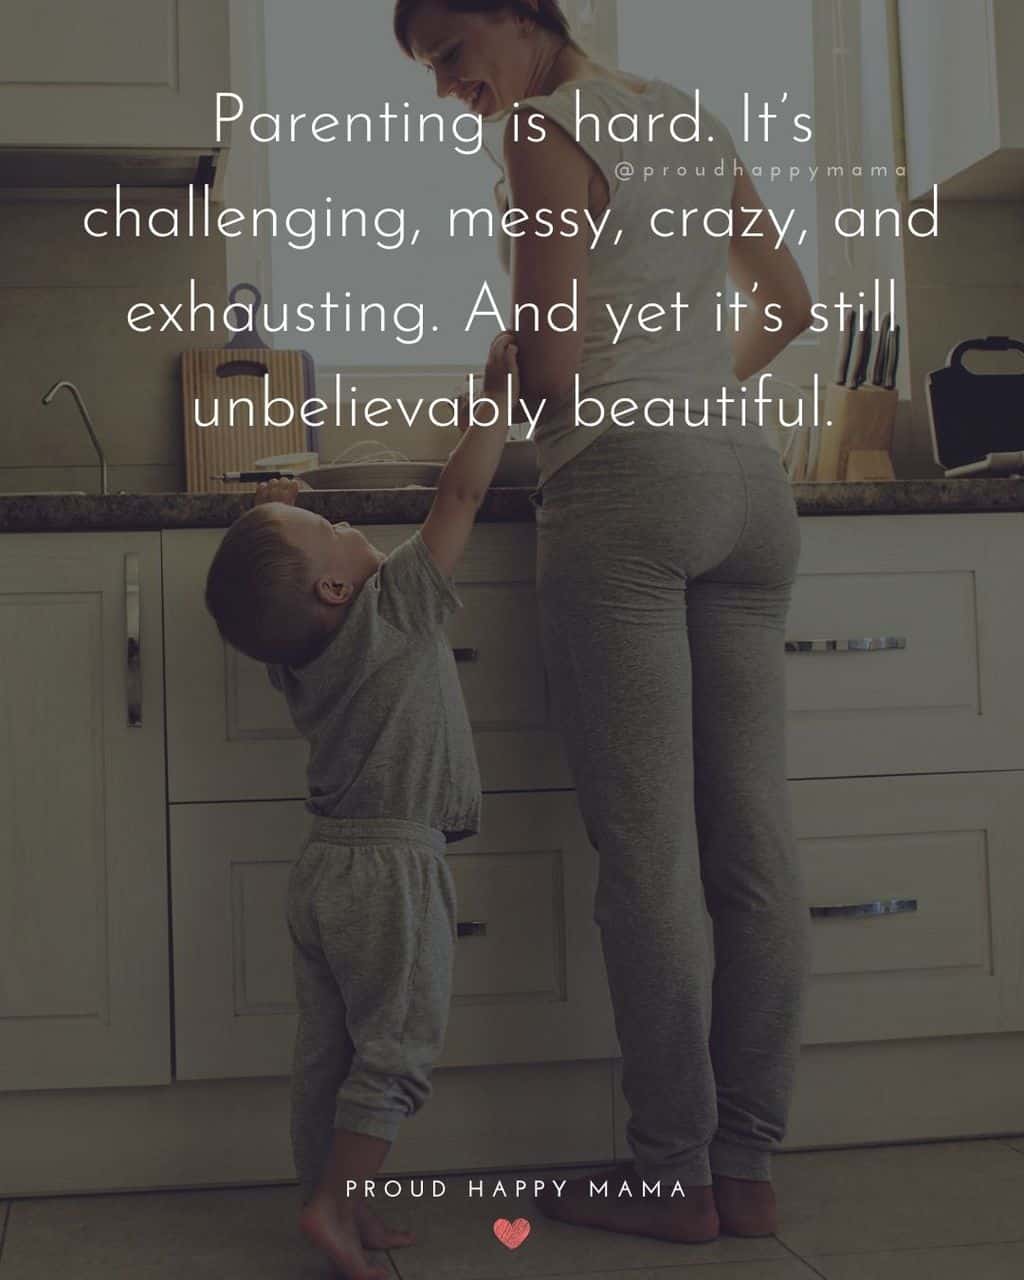 Parenting Quotes - Parenting is hard. It’s challenging, messy, crazy, and exhausting. And yet it’s still unbelievably beautiful.’